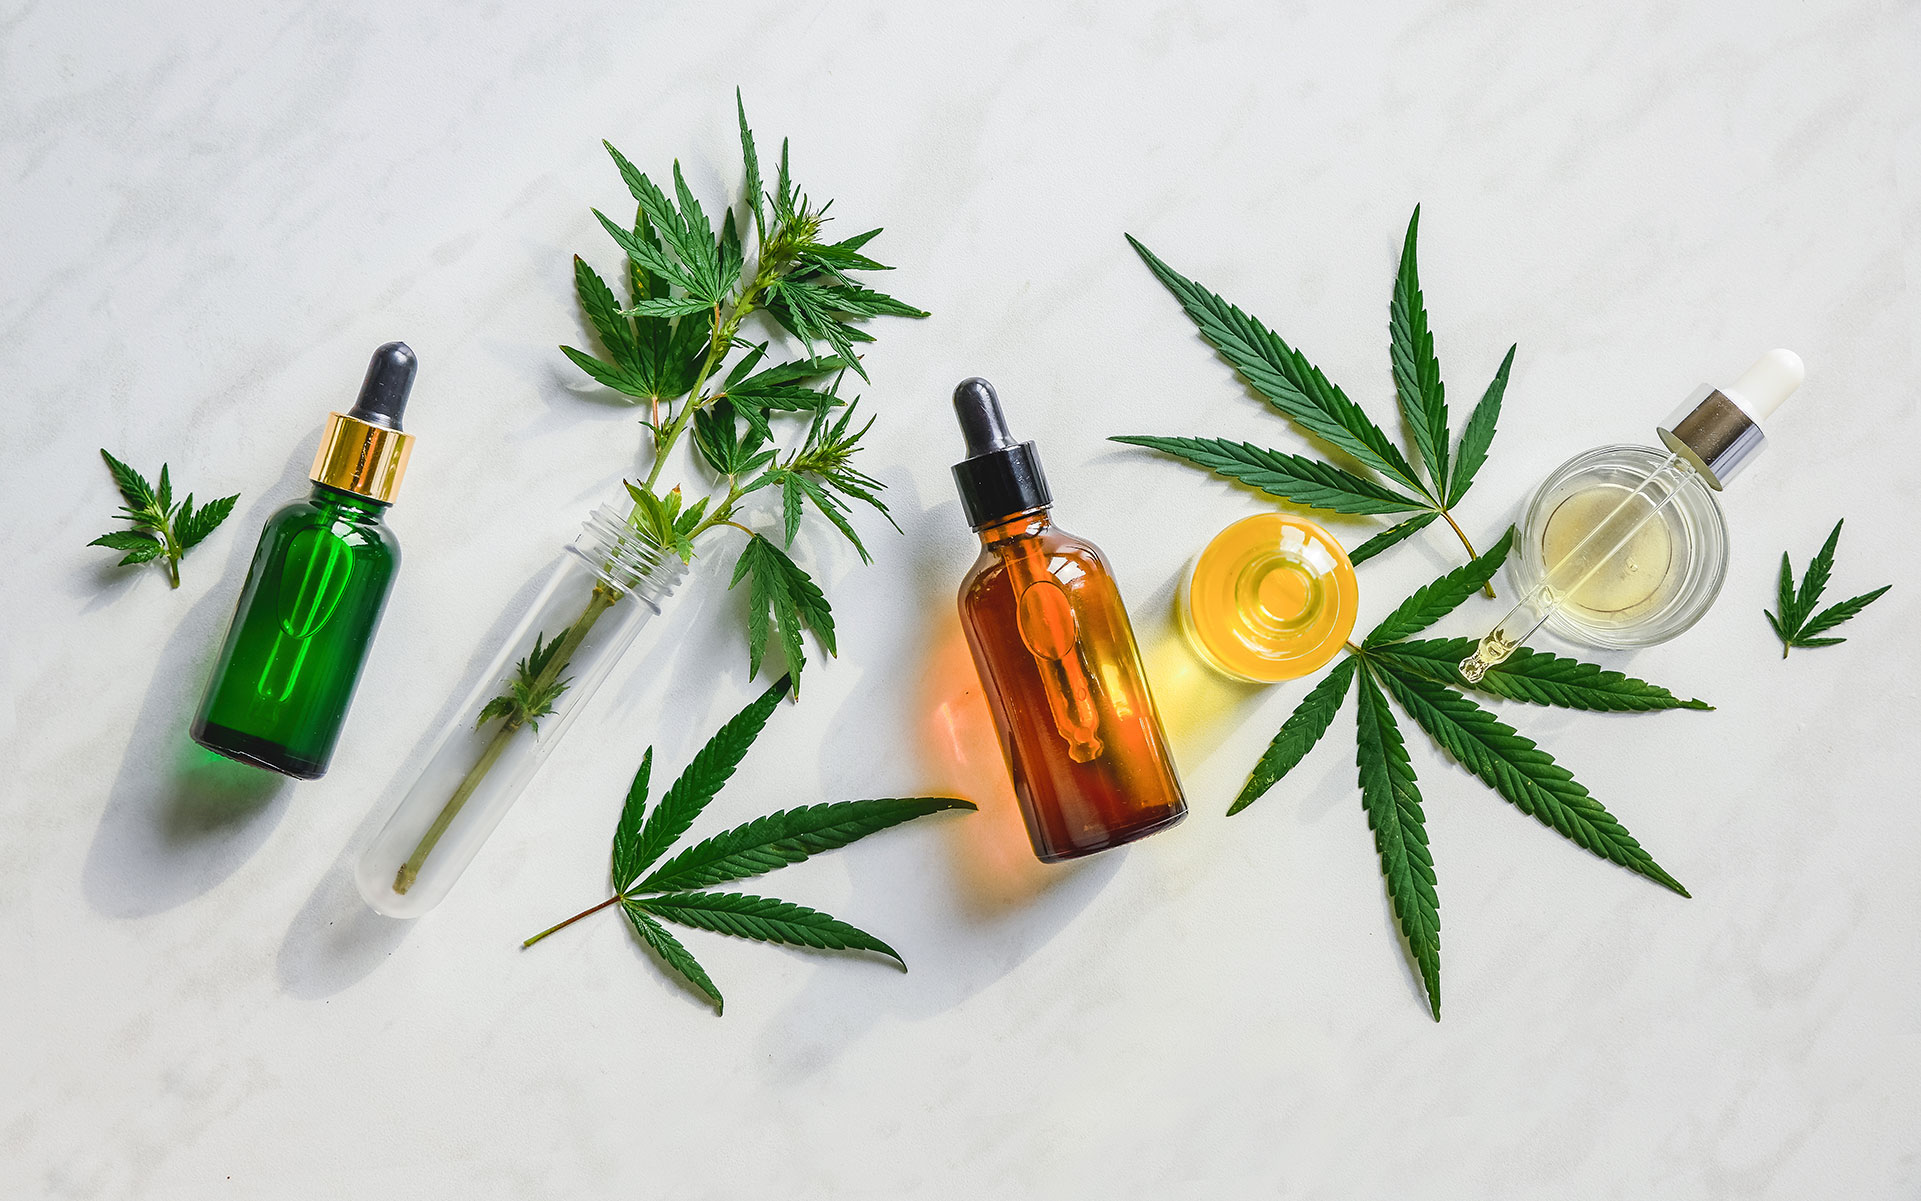 Where Can I Buy Cbd Oil In Alabama? - Cbd|Oil|Cannabidiol|Products|View|Abstract|Effects|Hemp|Cannabis|Product|Thc|Pain|People|Health|Body|Plant|Cannabinoids|Medications|Oils|Drug|Benefits|System|Study|Marijuana|Anxiety|Side|Research|Effect|Liver|Quality|Treatment|Studies|Epilepsy|Symptoms|Gummies|Compounds|Dose|Time|Inflammation|Bottle|Cbd Oil|View Abstract|Side Effects|Cbd Products|Endocannabinoid System|Multiple Sclerosis|Cbd Oils|Cbd Gummies|Cannabis Plant|Hemp Oil|Cbd Product|Hemp Plant|United States|Cytochrome P450|Many People|Chronic Pain|Nuleaf Naturals|Royal Cbd|Full-Spectrum Cbd Oil|Drug Administration|Cbd Oil Products|Medical Marijuana|Drug Test|Heavy Metals|Clinical Trial|Clinical Trials|Cbd Oil Side|Rating Highlights|Wide Variety|Animal Studies